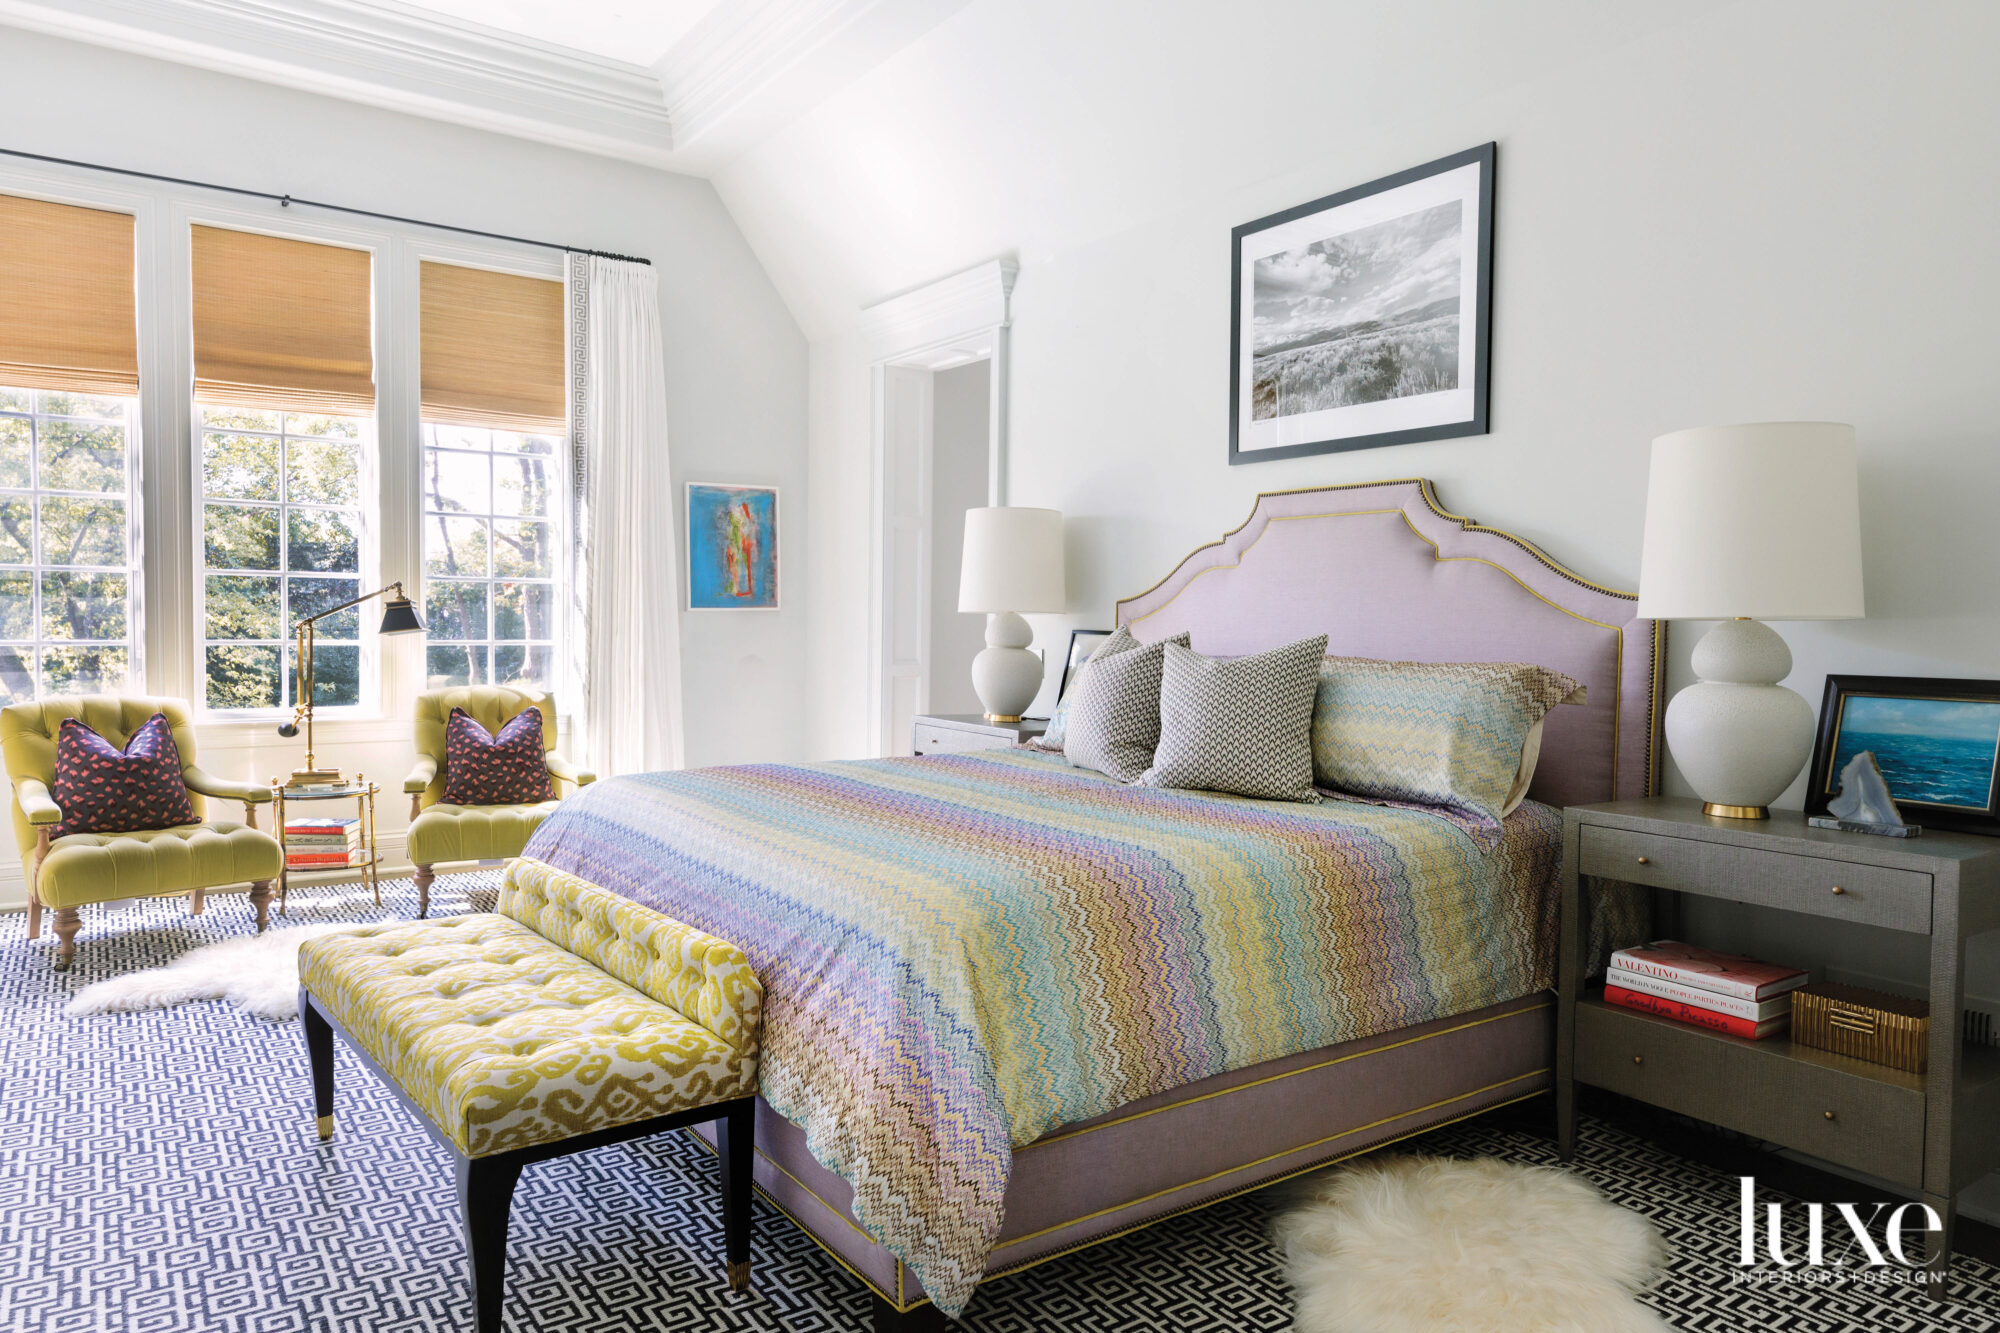 A purple bed has striped purple, yellow and green linens. There are yellow chair in the corner.